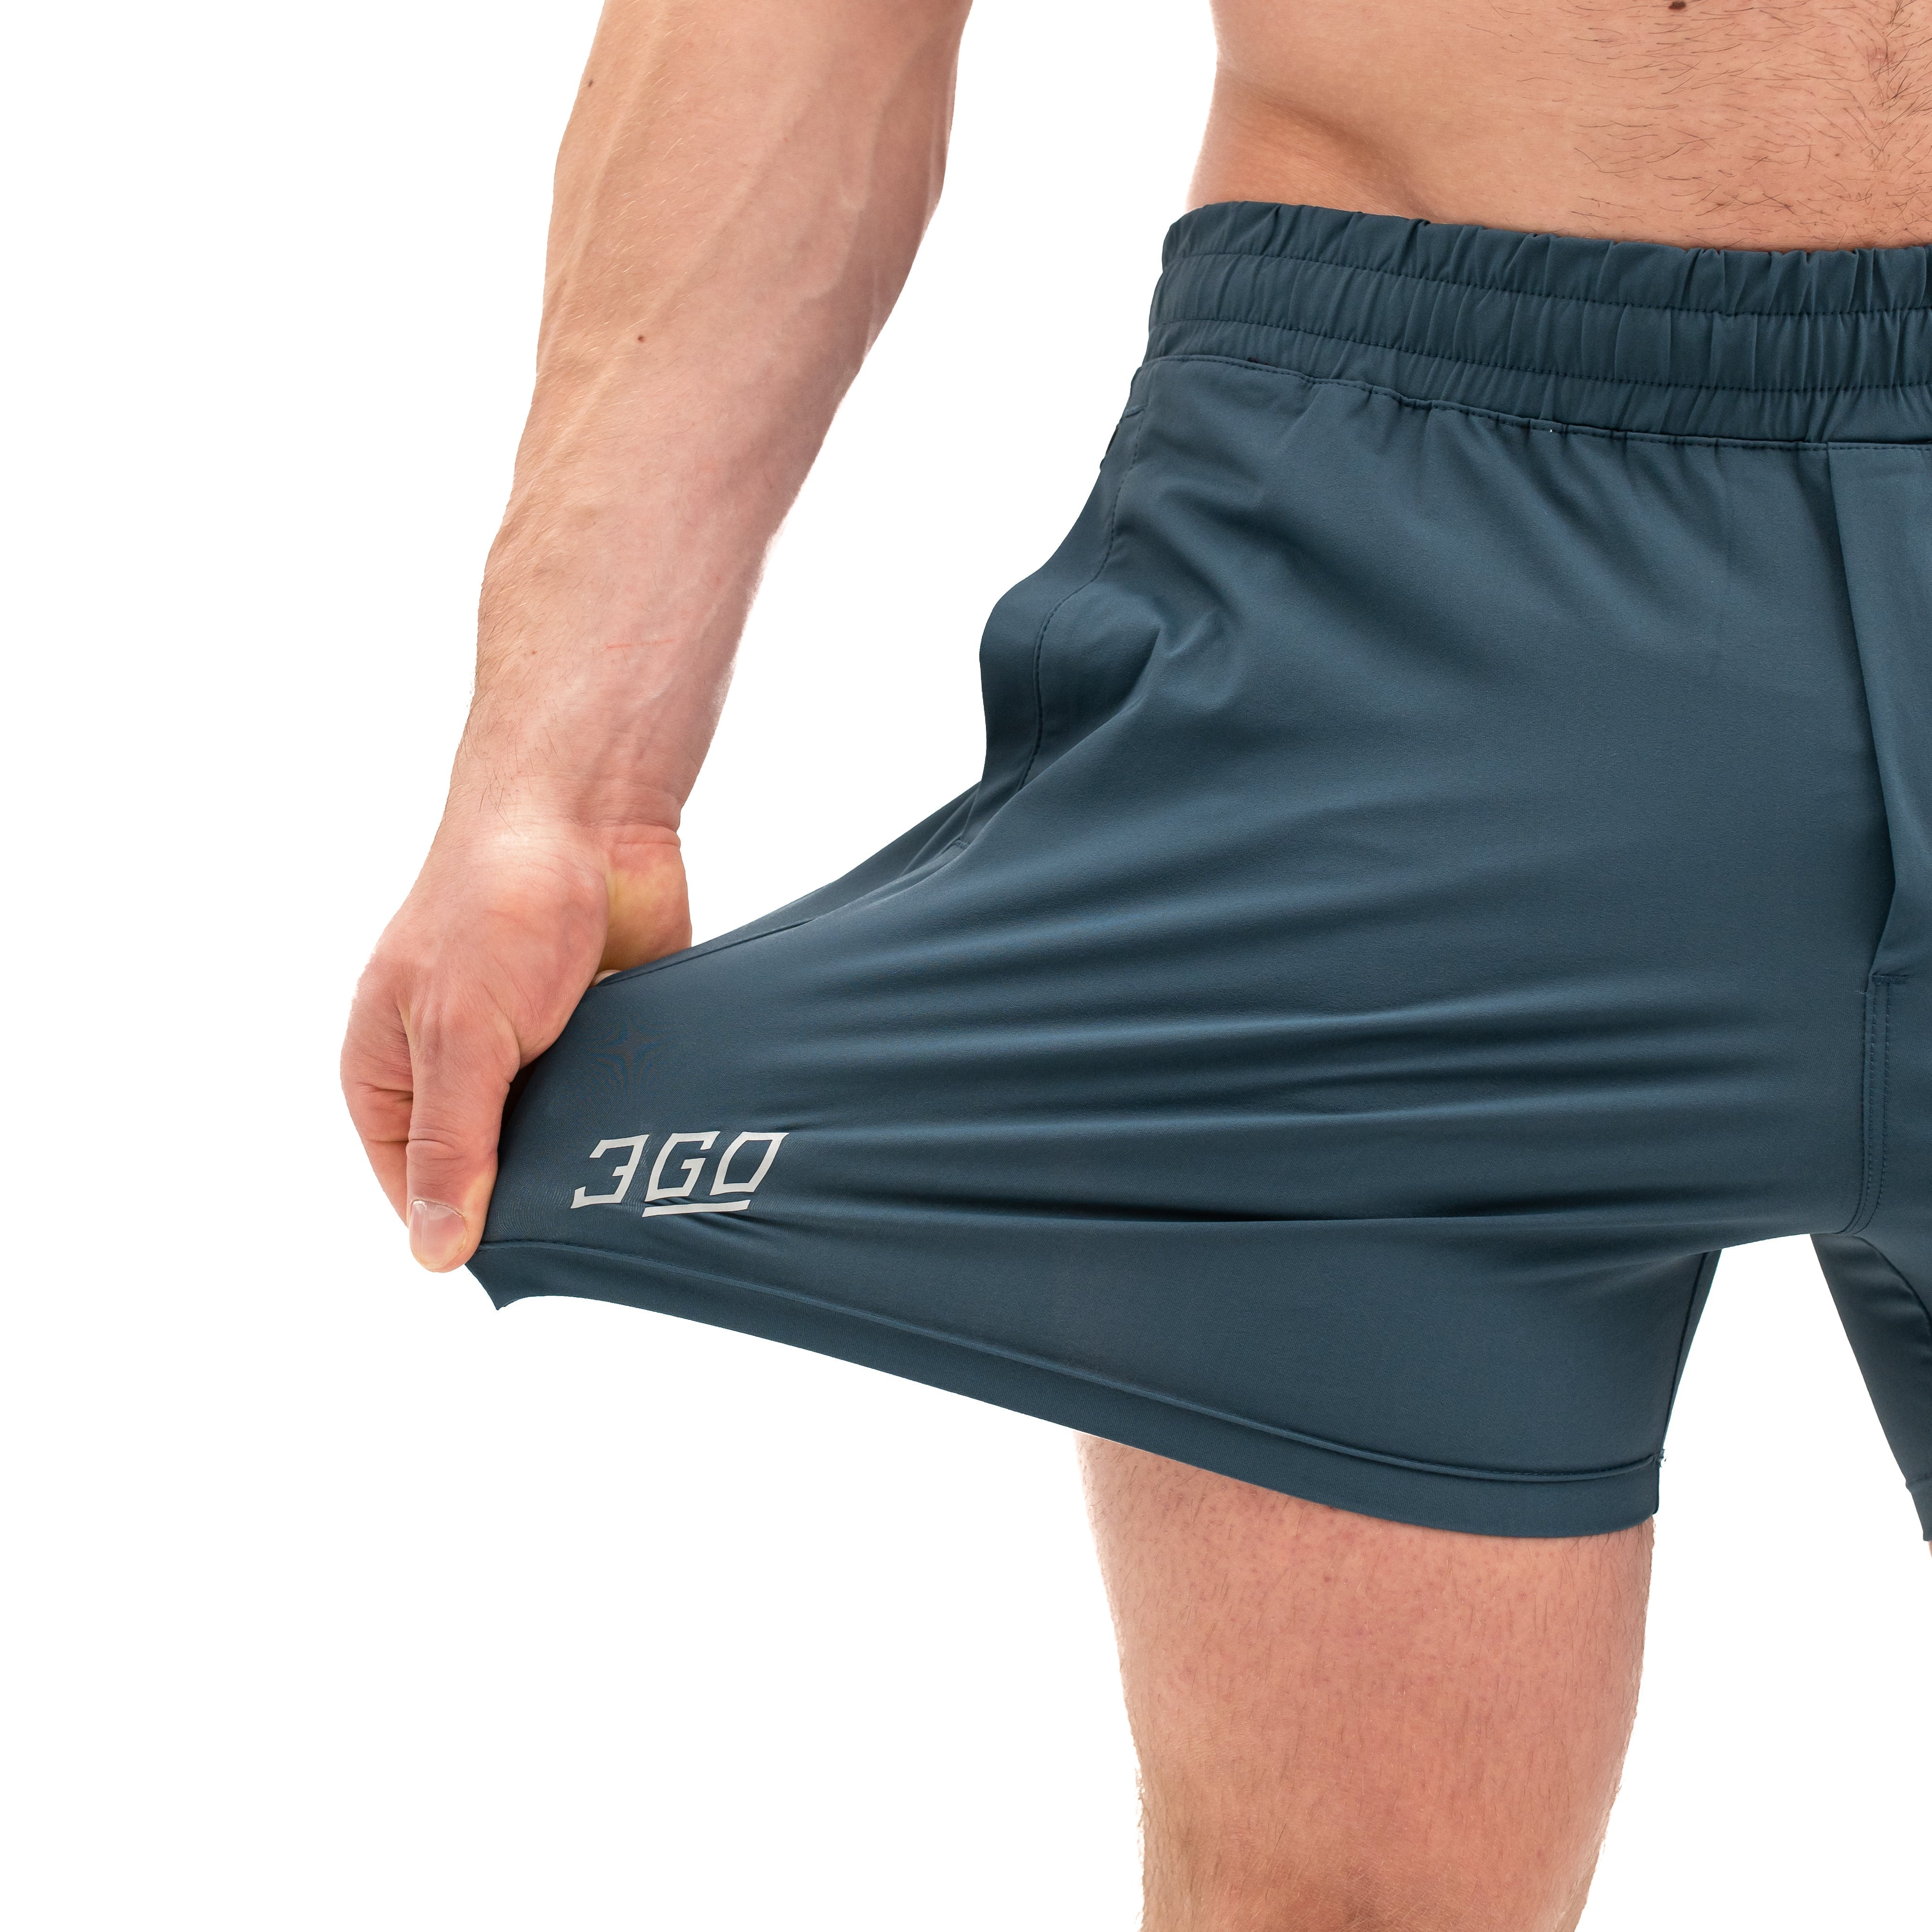 Steel 360-GO KWD shorts were created to provide the flexibility for all the movements in your training while offering the comfort and fit you have come to love through our KWD shorts. Purchase 360-GO KWD shorts from A7 UK and A7 Europe. 360-GO KWD shorts are perfect for powerlifting and weightlifting training. Available in UK and Europe including France, Italy, Germany, the Netherlands, Sweden and Poland.